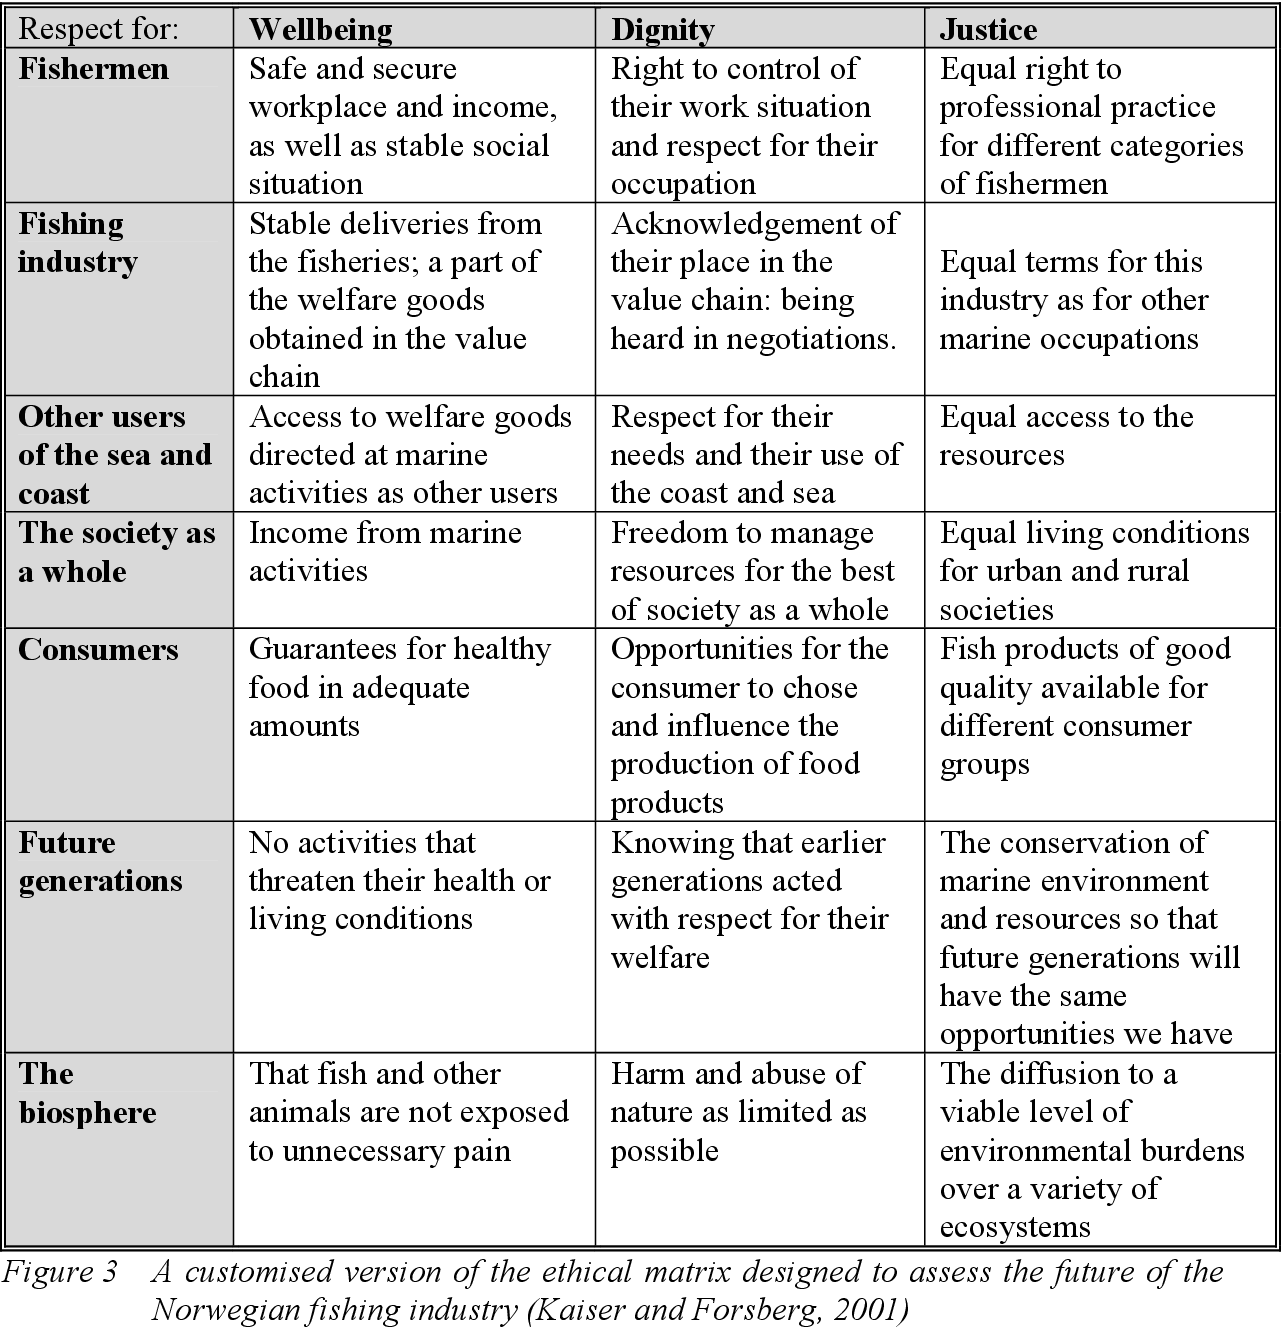 A customised version of the ethical matrix designed to assess the future of the Norwegian fishing industry (Kaiser and Forsberg, 2001)